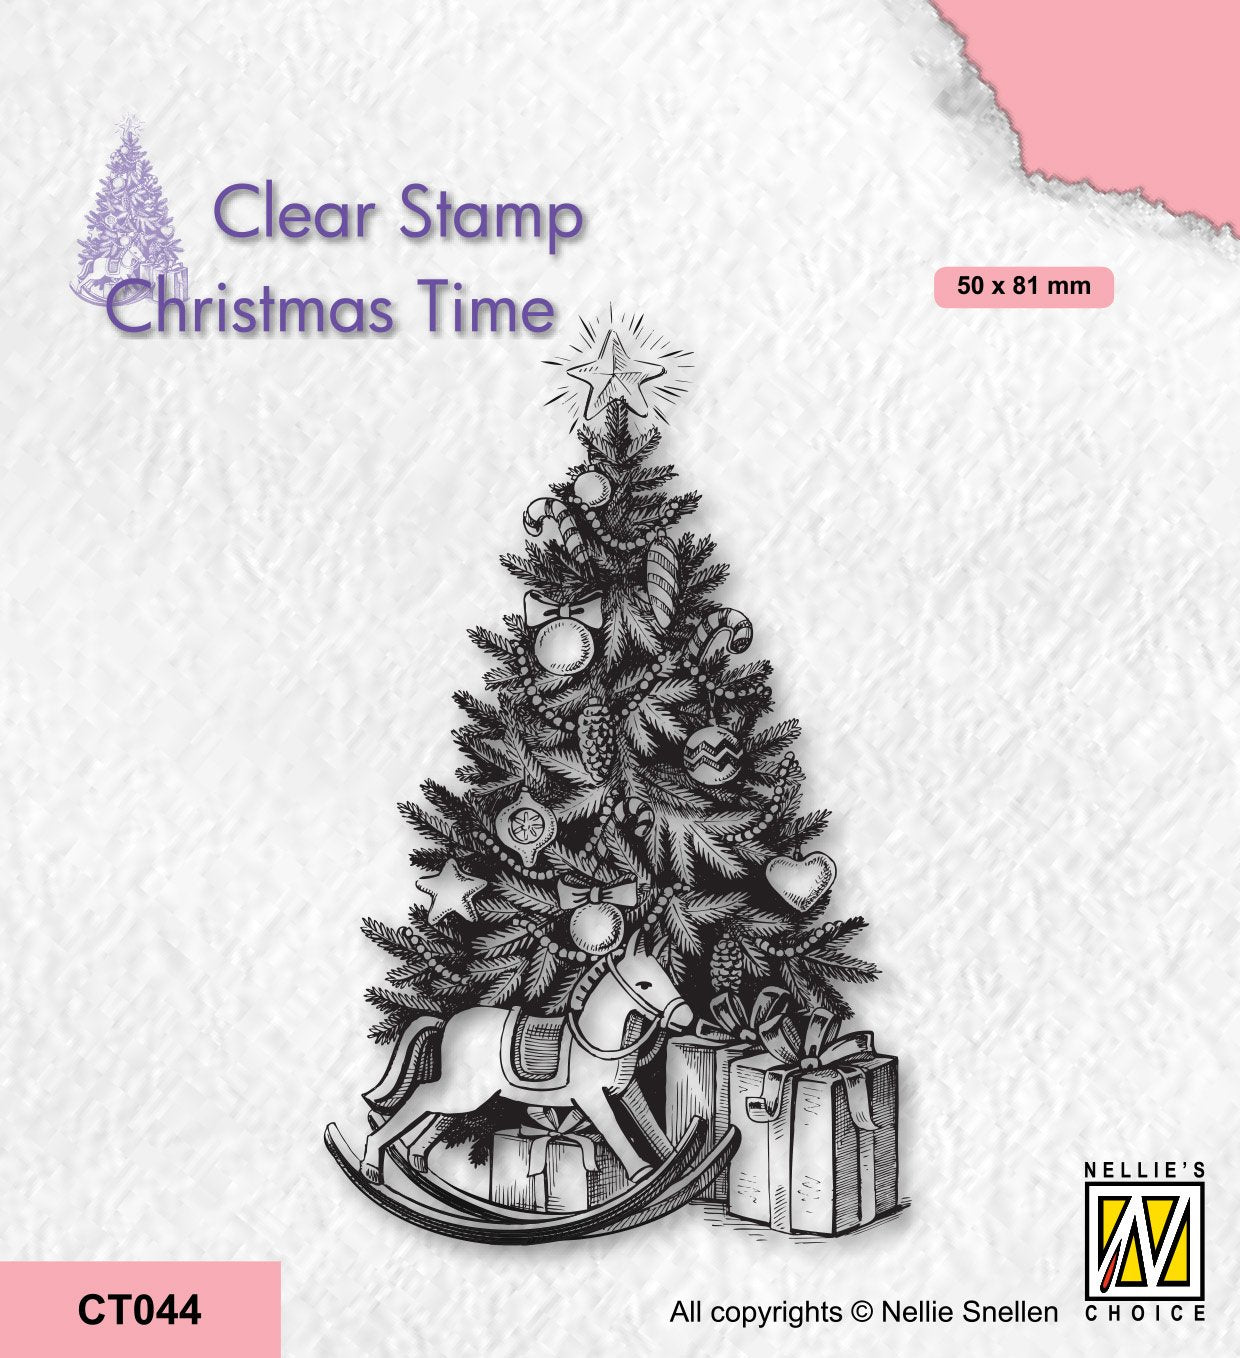 Nellie's Choice Clear Stamp Christmas Time - Christmas Tree And Presents